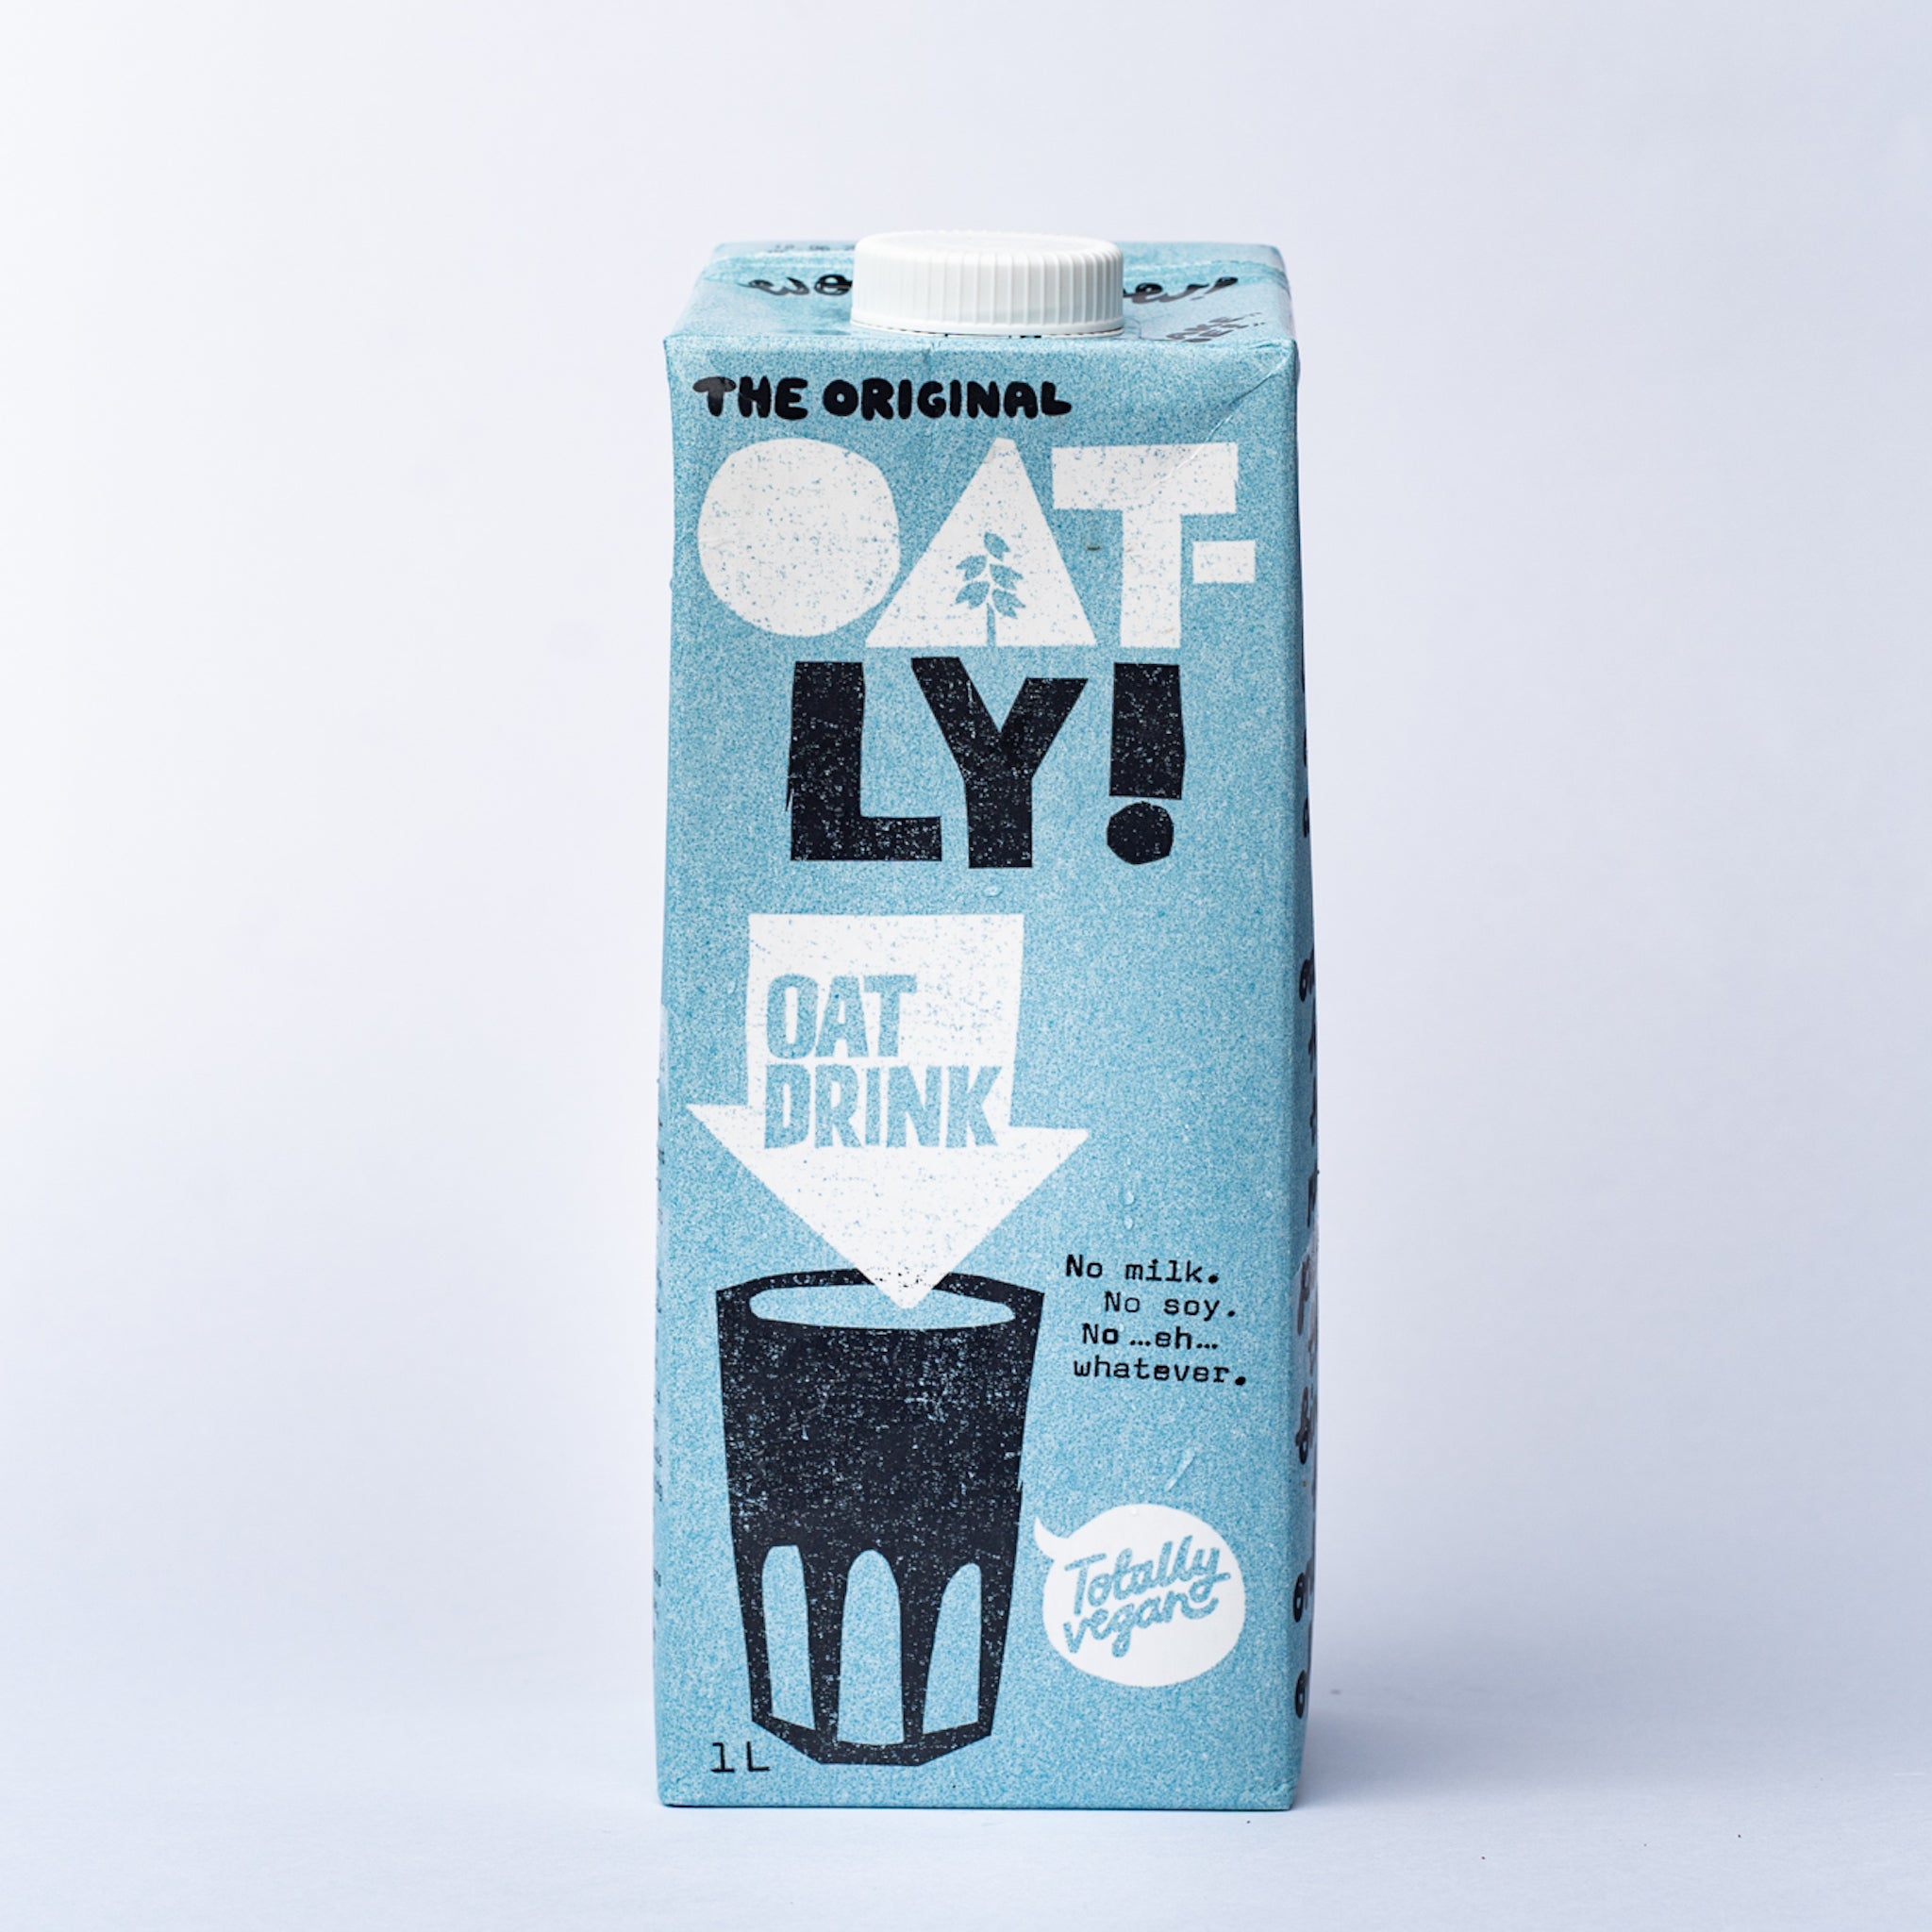 A 1l tetra pack of Oatly Oat Drink Enriched.